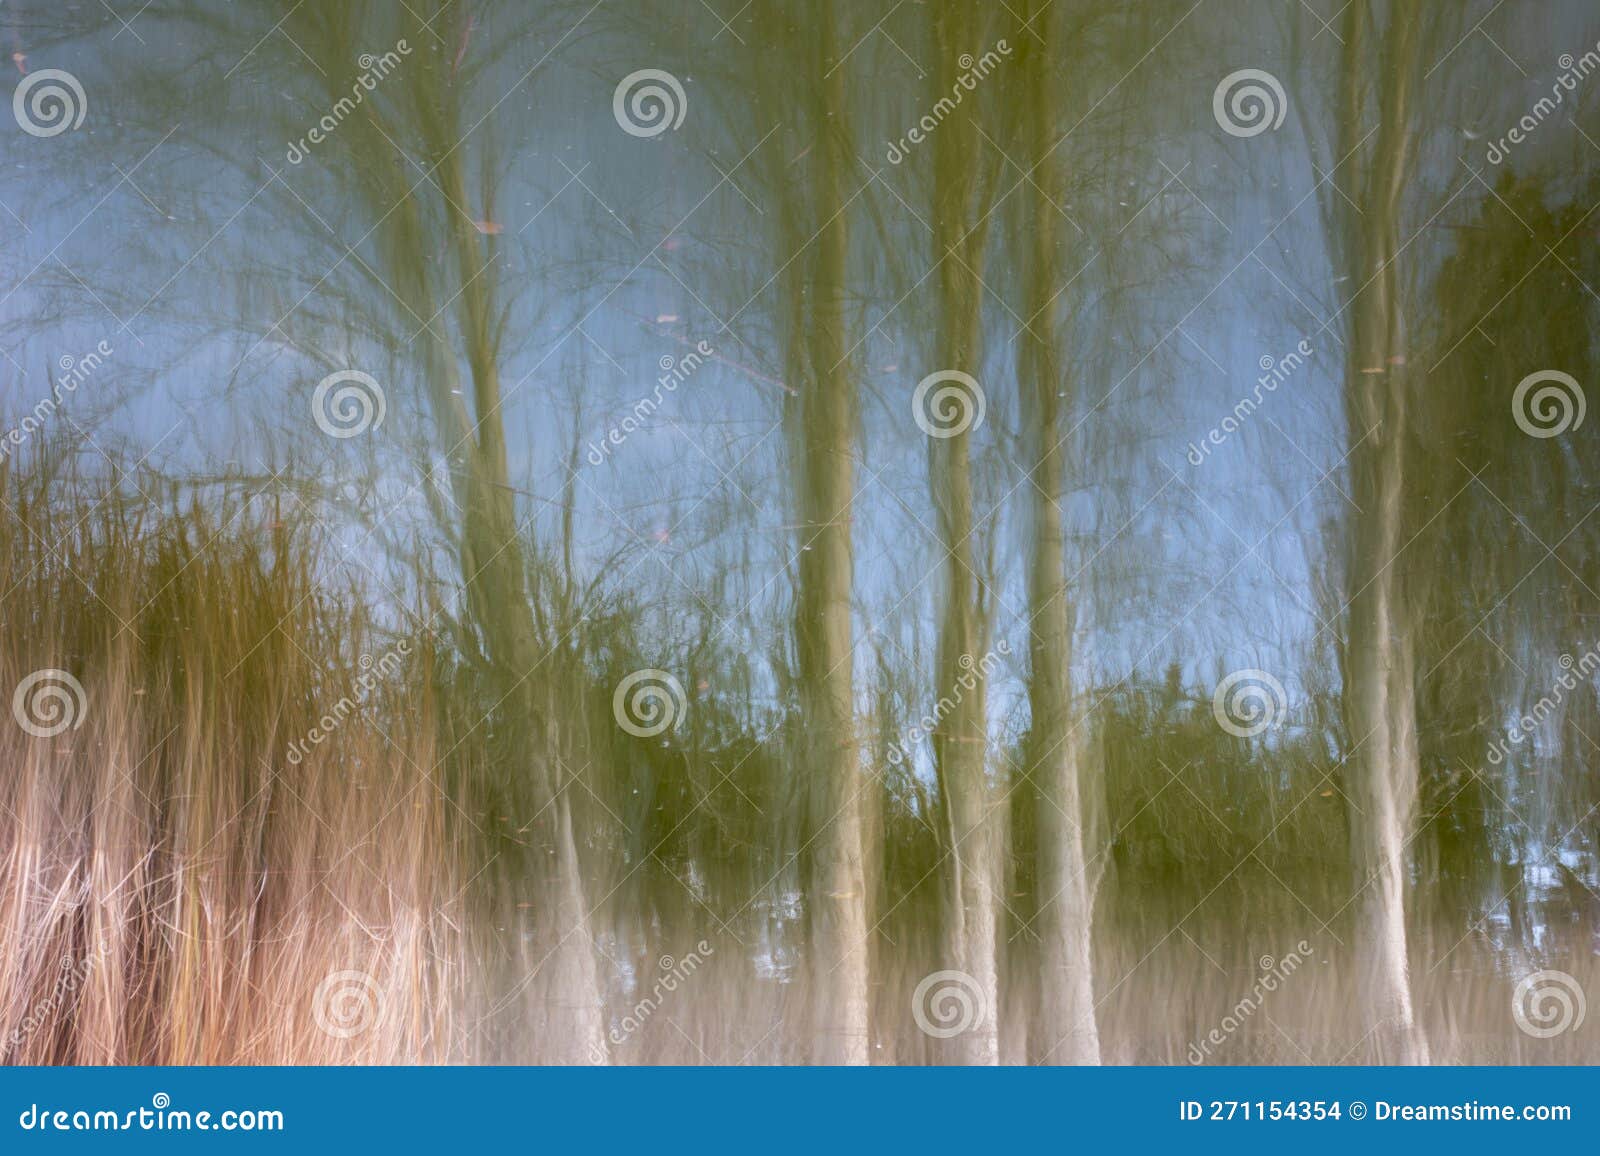 photography of trees in the forest, icm